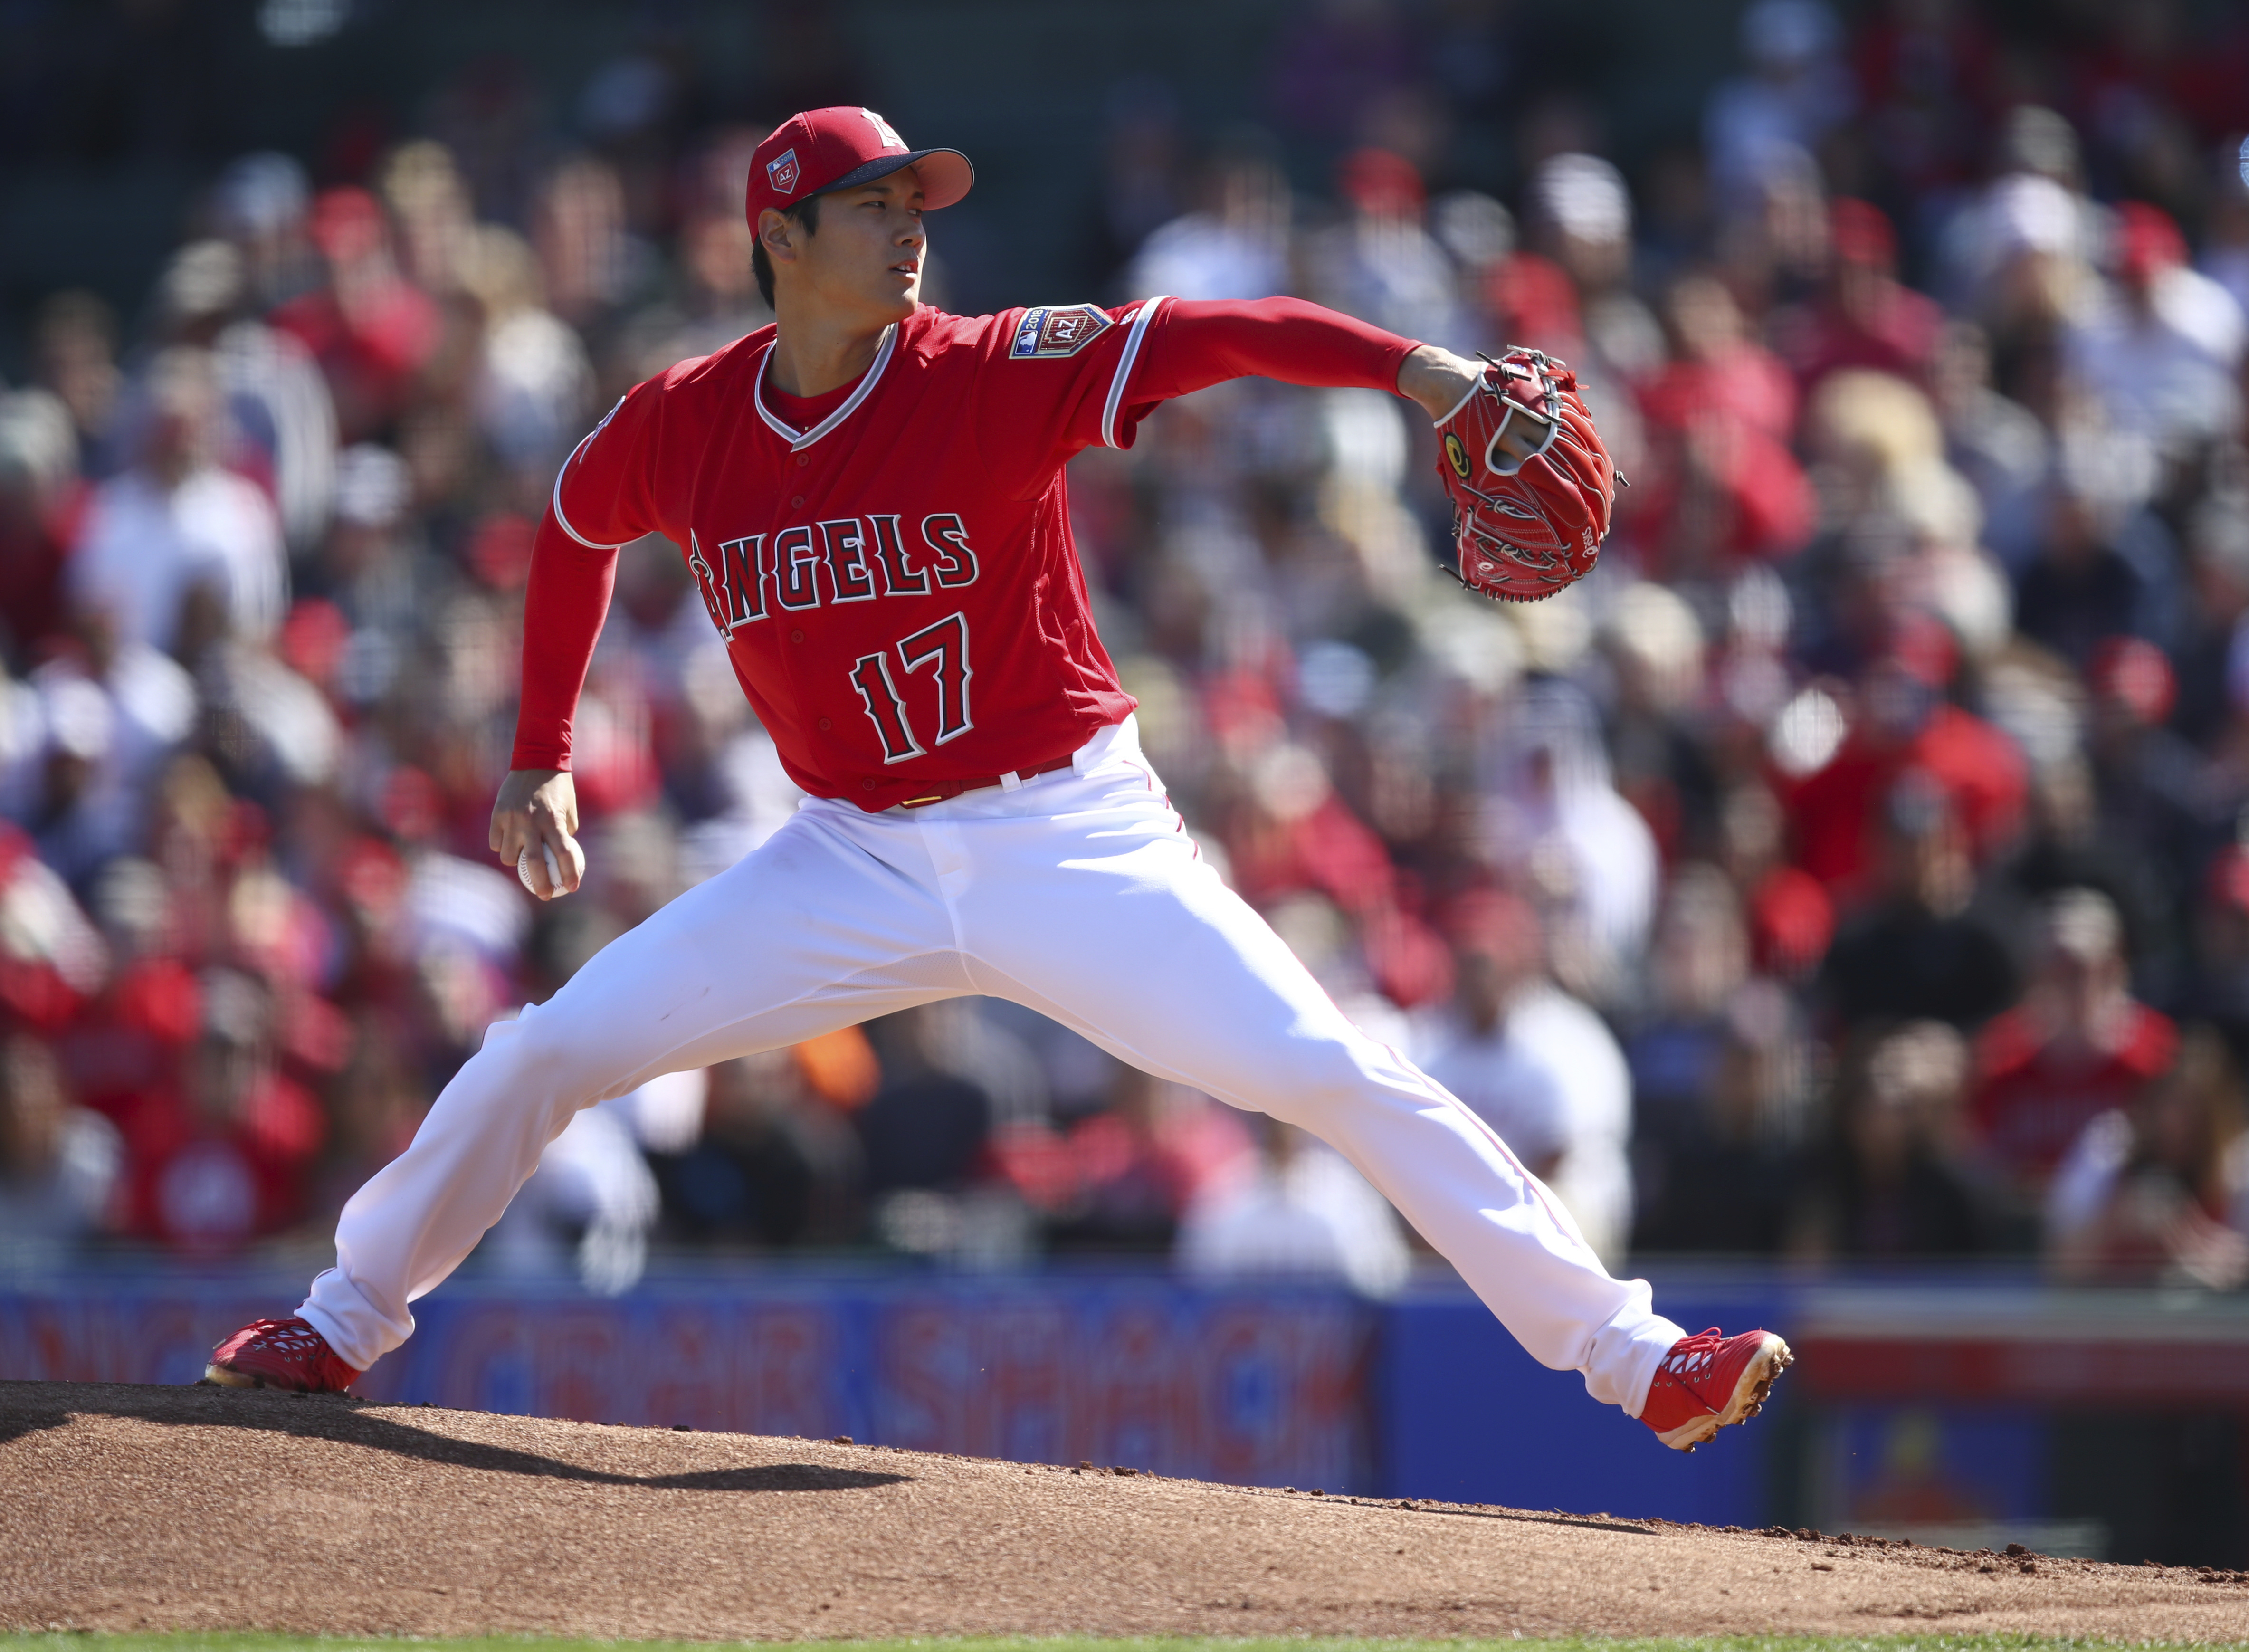 Shohei Ohtani a big draw at Angels spring training, especially for